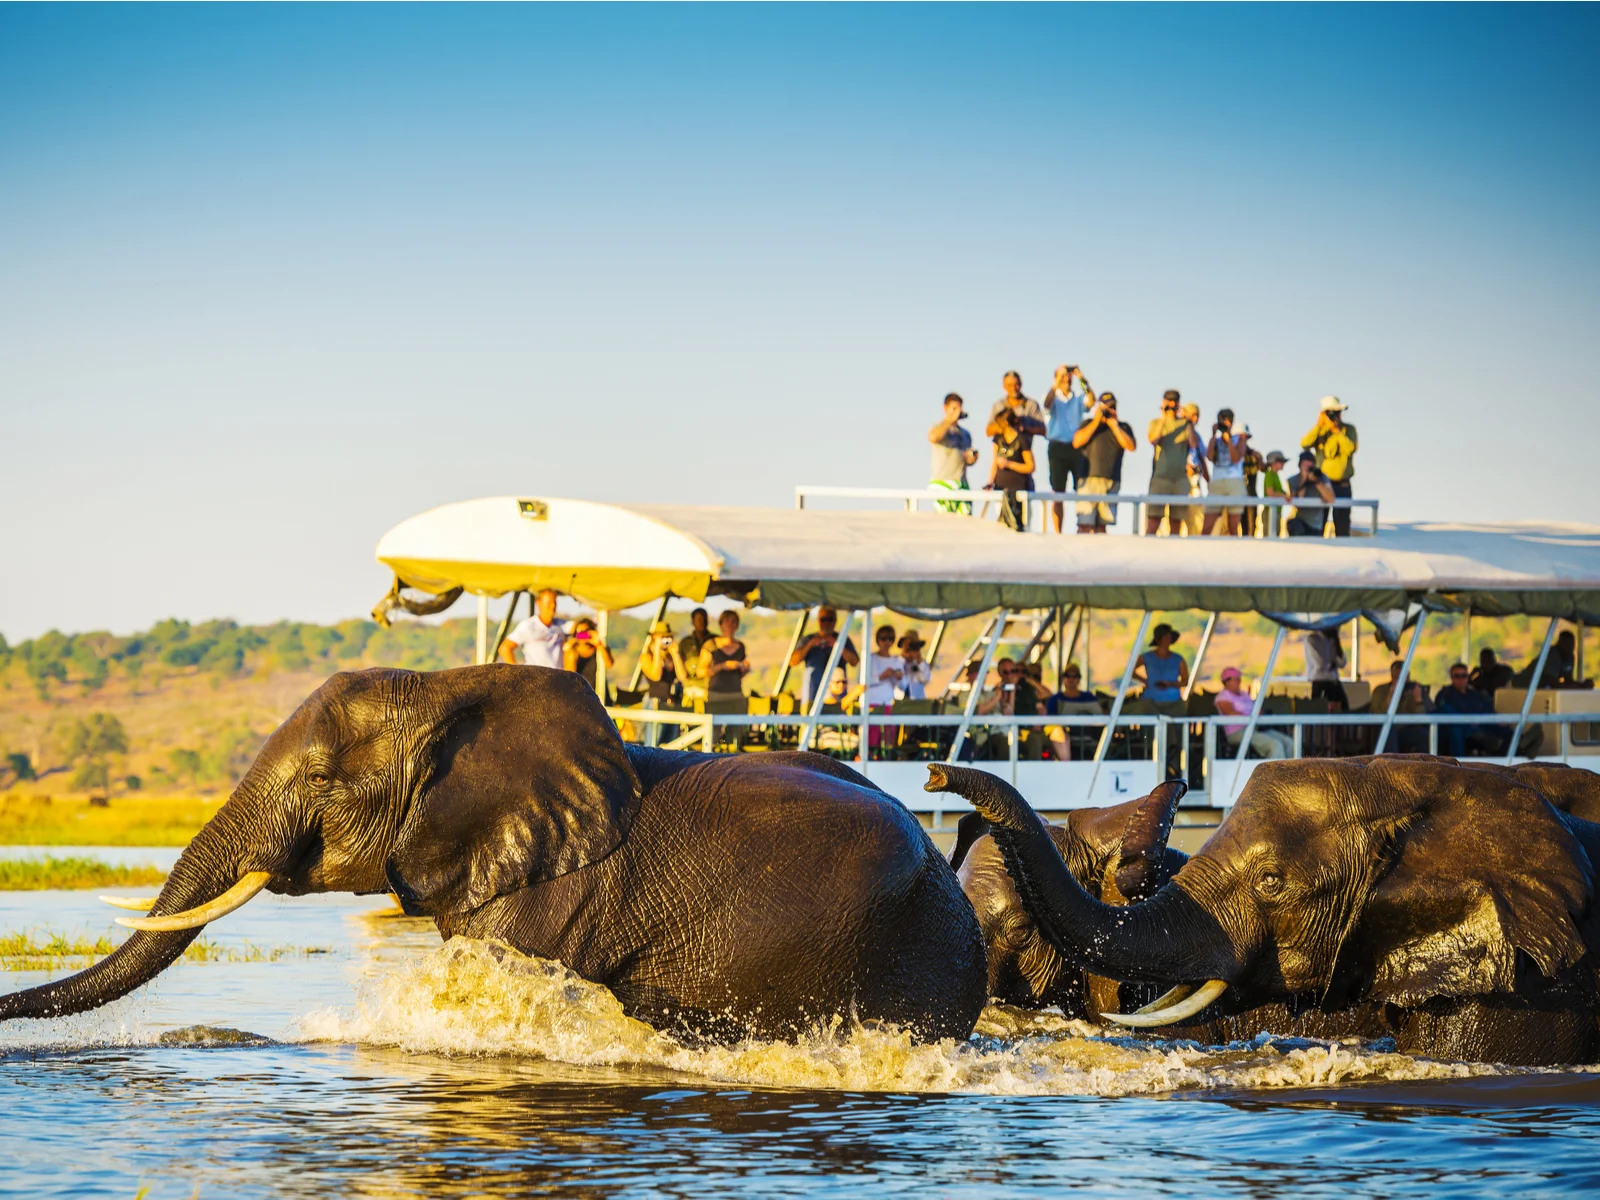 Tourists on one the of the best African safaris in Botswana watching elephants cross the river